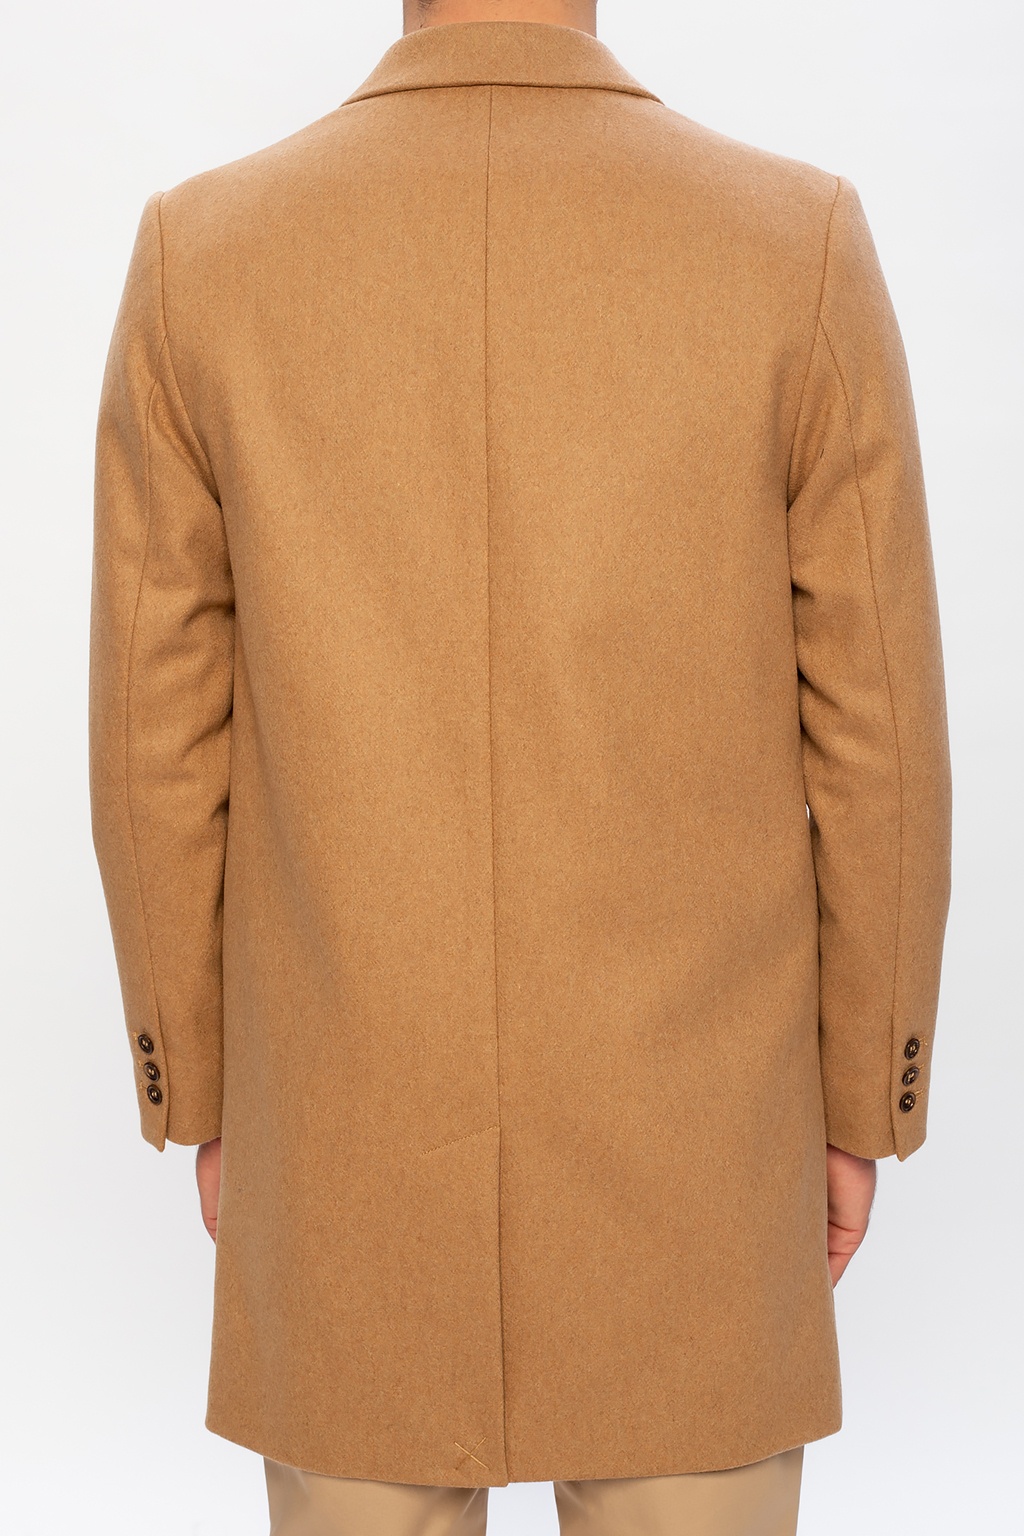 A.P.C. the hottest trend of the season